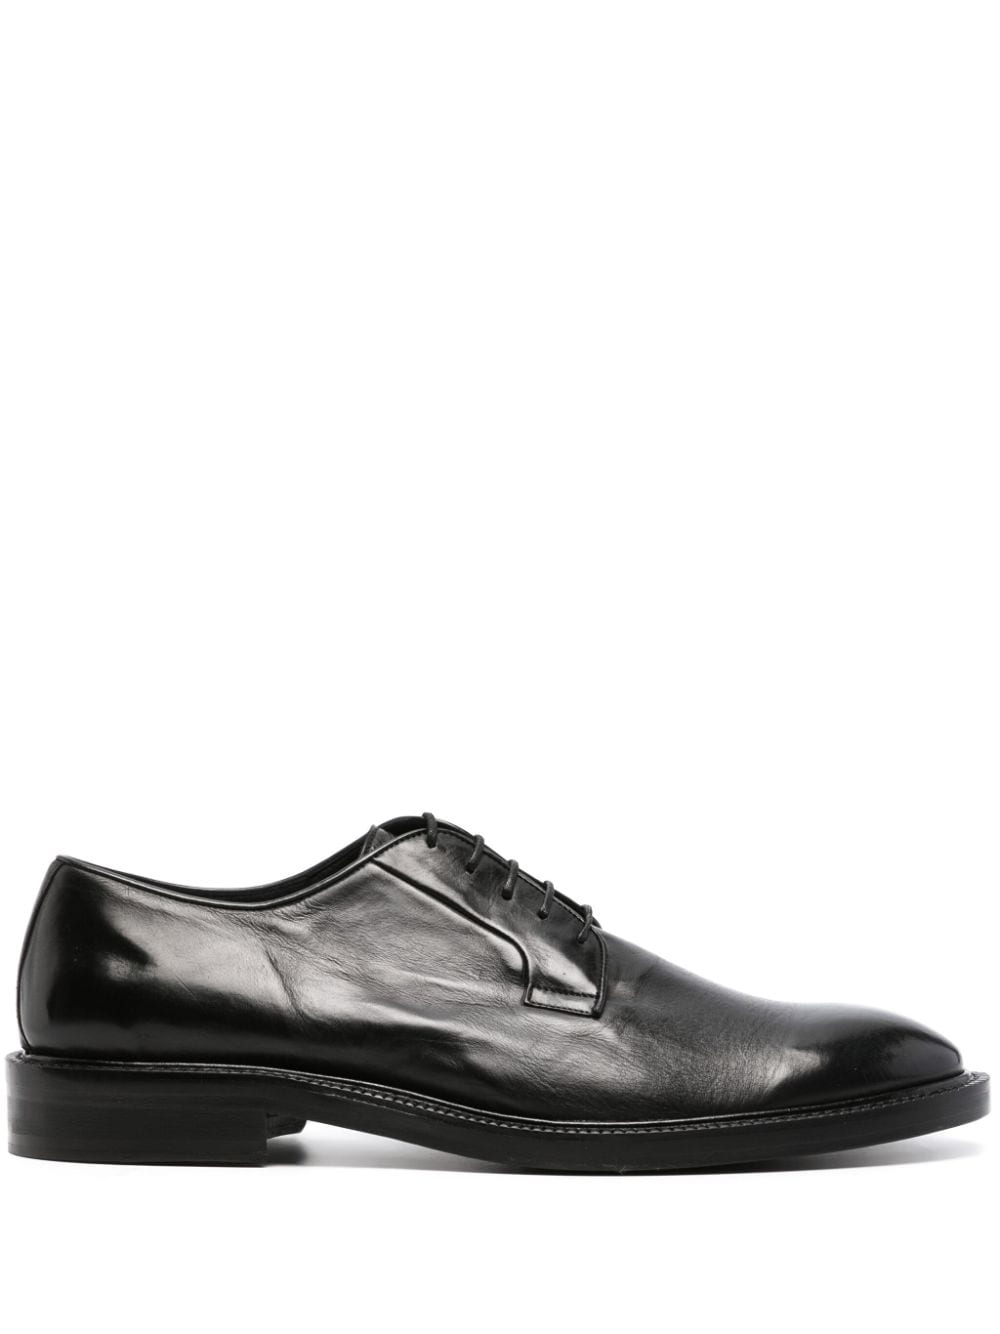 Paul Smith lace-up leather derby shoes - Black von Paul Smith